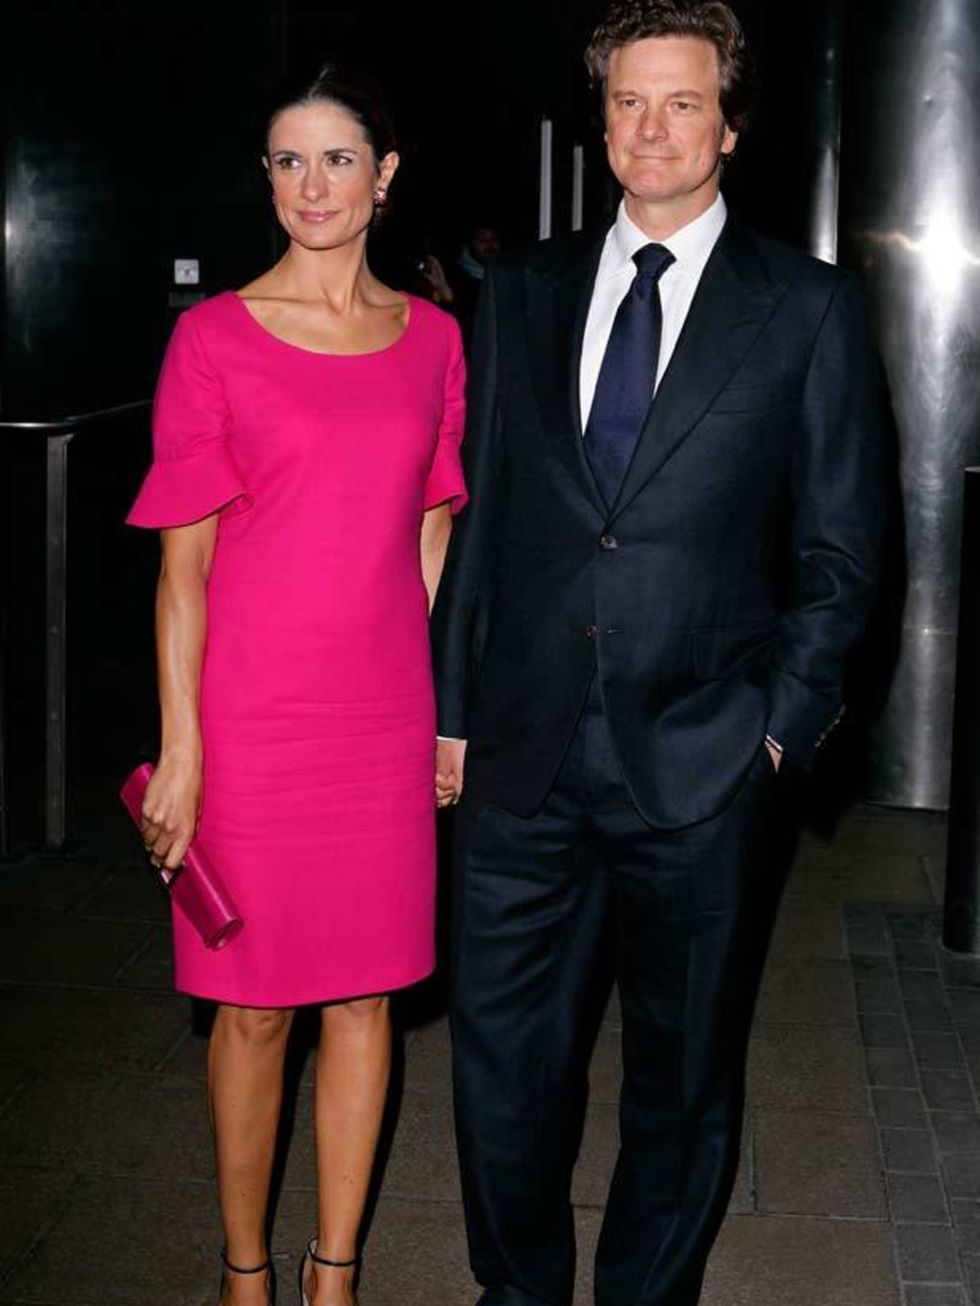 <p><a href="http://www.elleuk.com/content/search?SearchText=livia+firth&amp;SearchButton=Search">Livia</a> &amp; <a href="http://www.elleuk.com/content/search?SearchText=colin+firth&amp;SearchButton=Search">Colin Firth</a> attend the The Wool Modern exhib